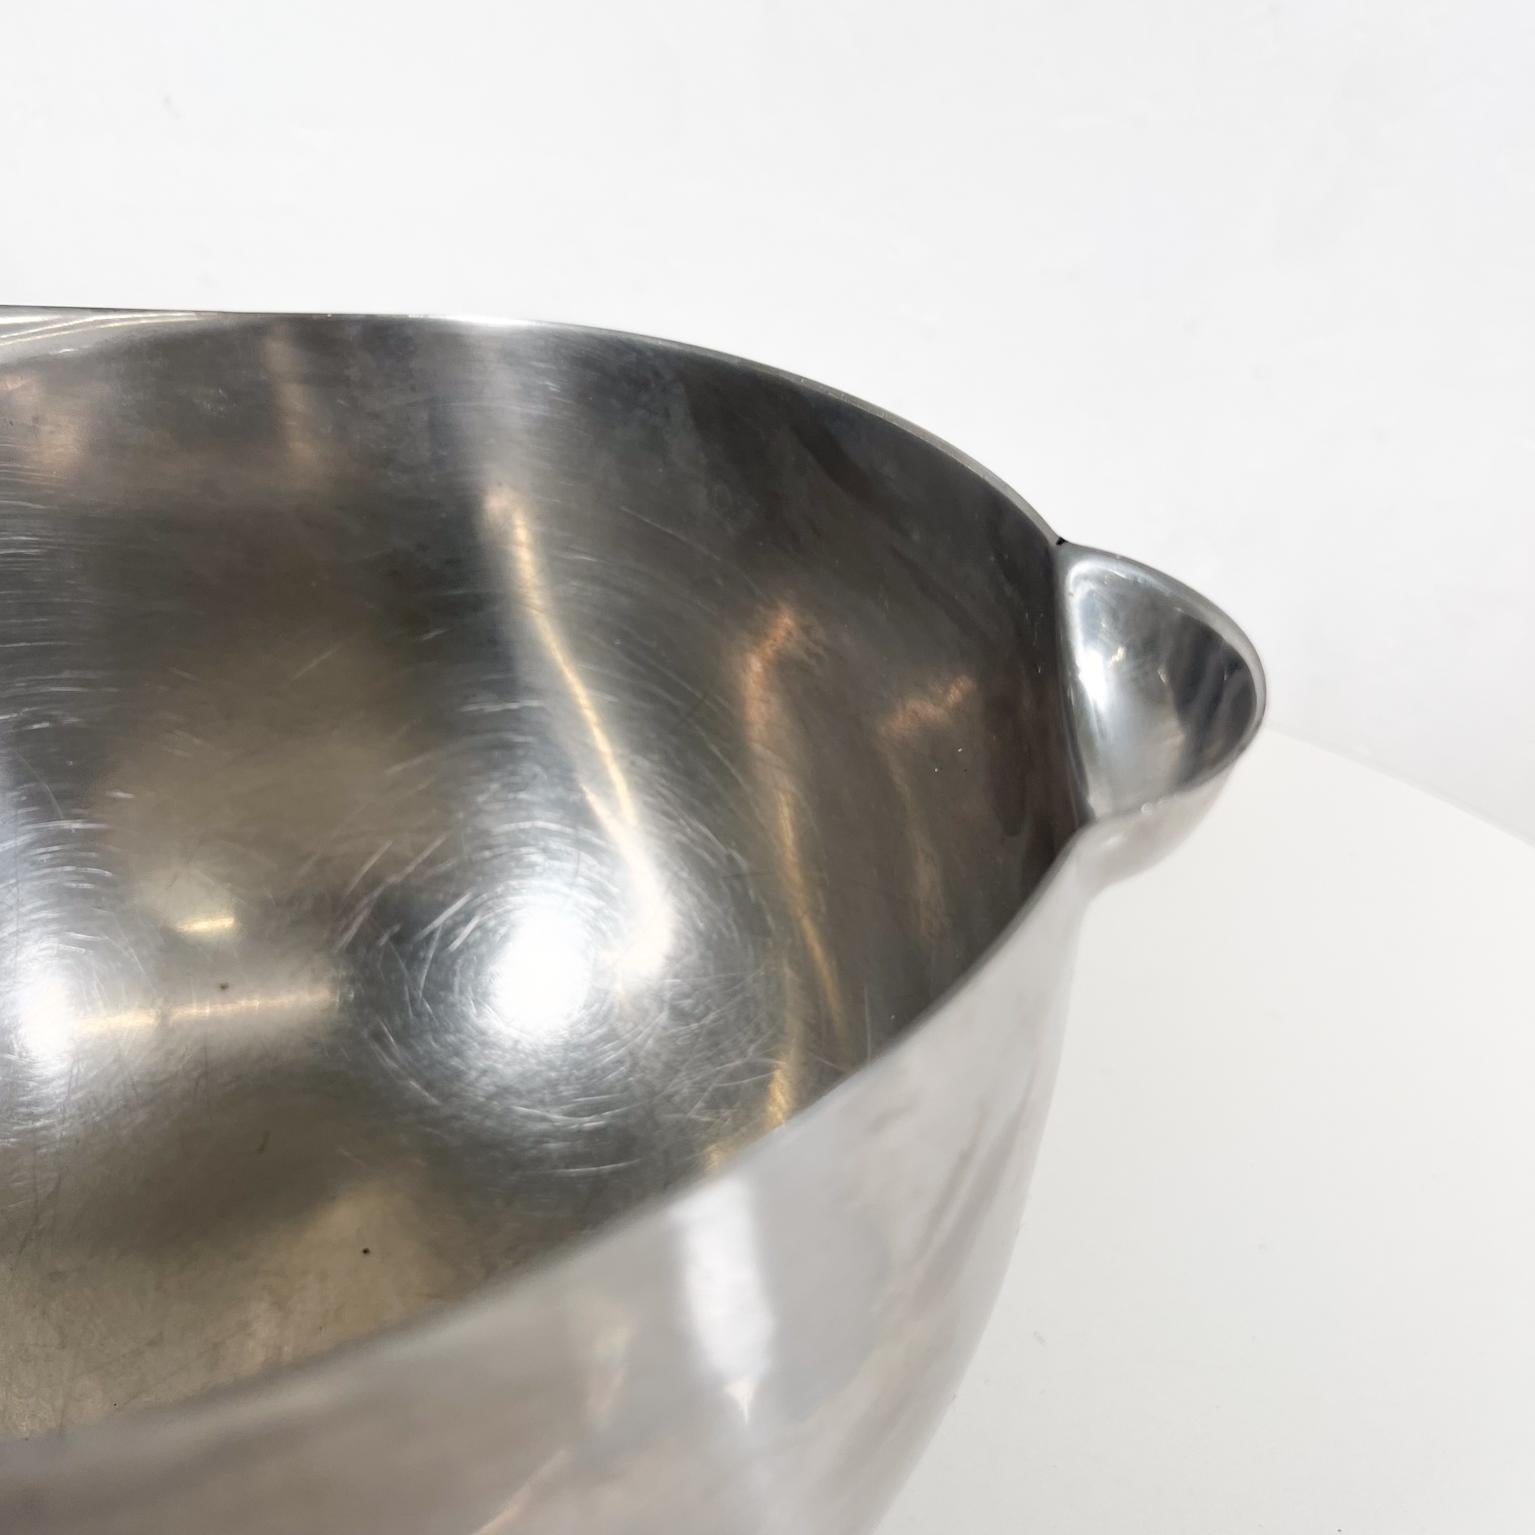 1985 Michael Graves Design Stainless Steel Footed Mixing Bowl For Sale 3